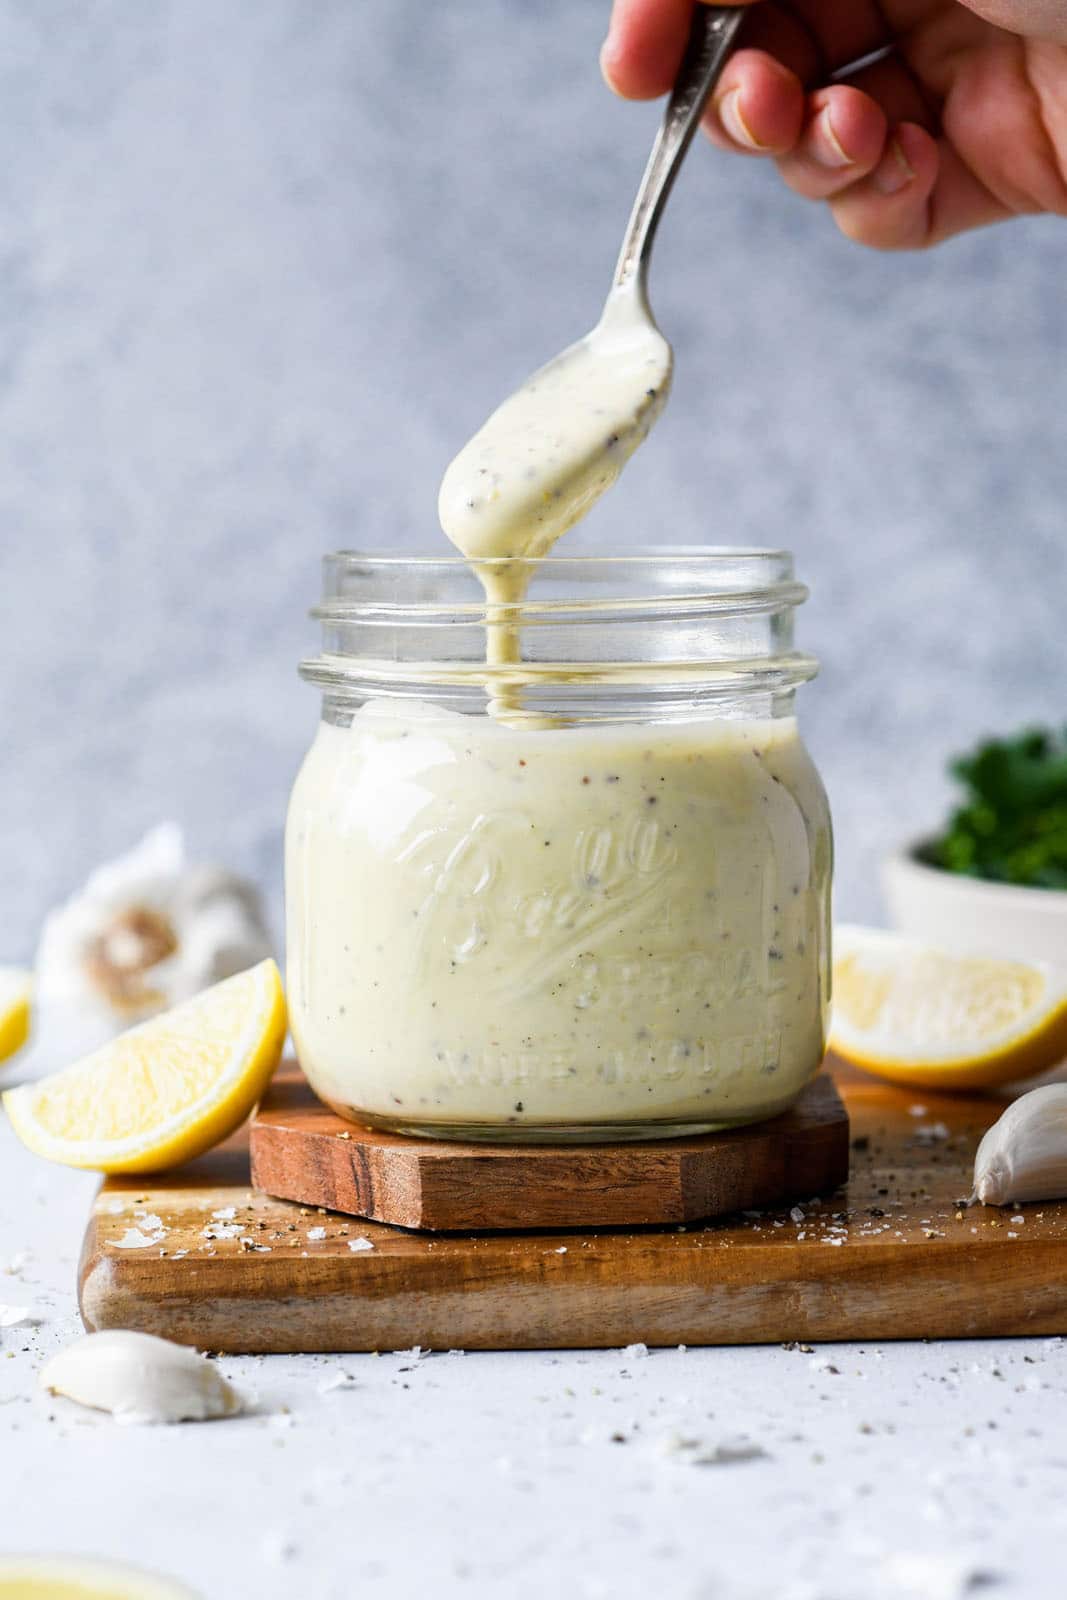 Easy Caesar Salad Dressing Recipe (Dairy Free) - Simply Whisked